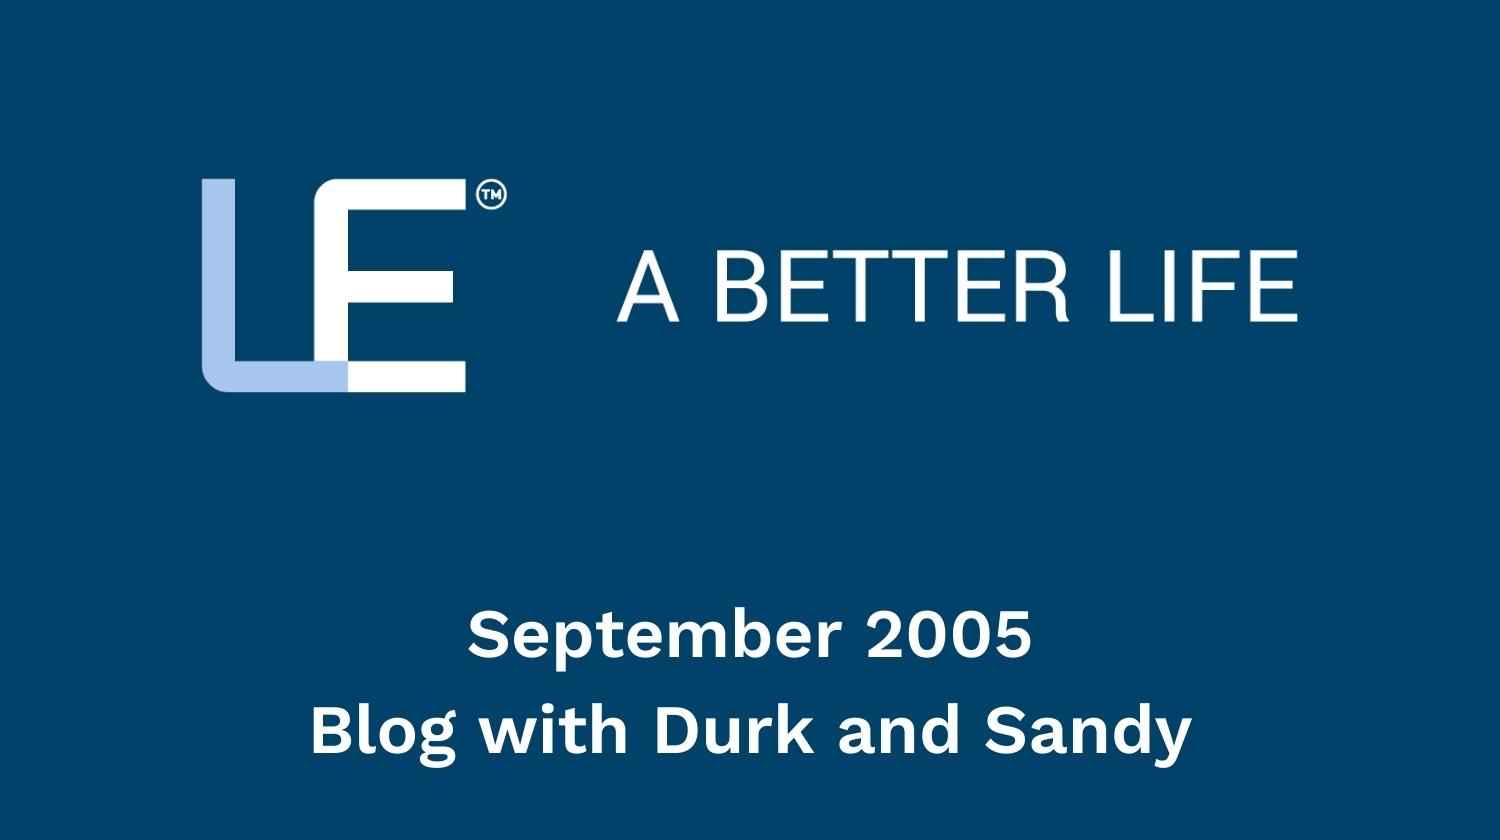 September 2005 Blog with Durk and Sandy